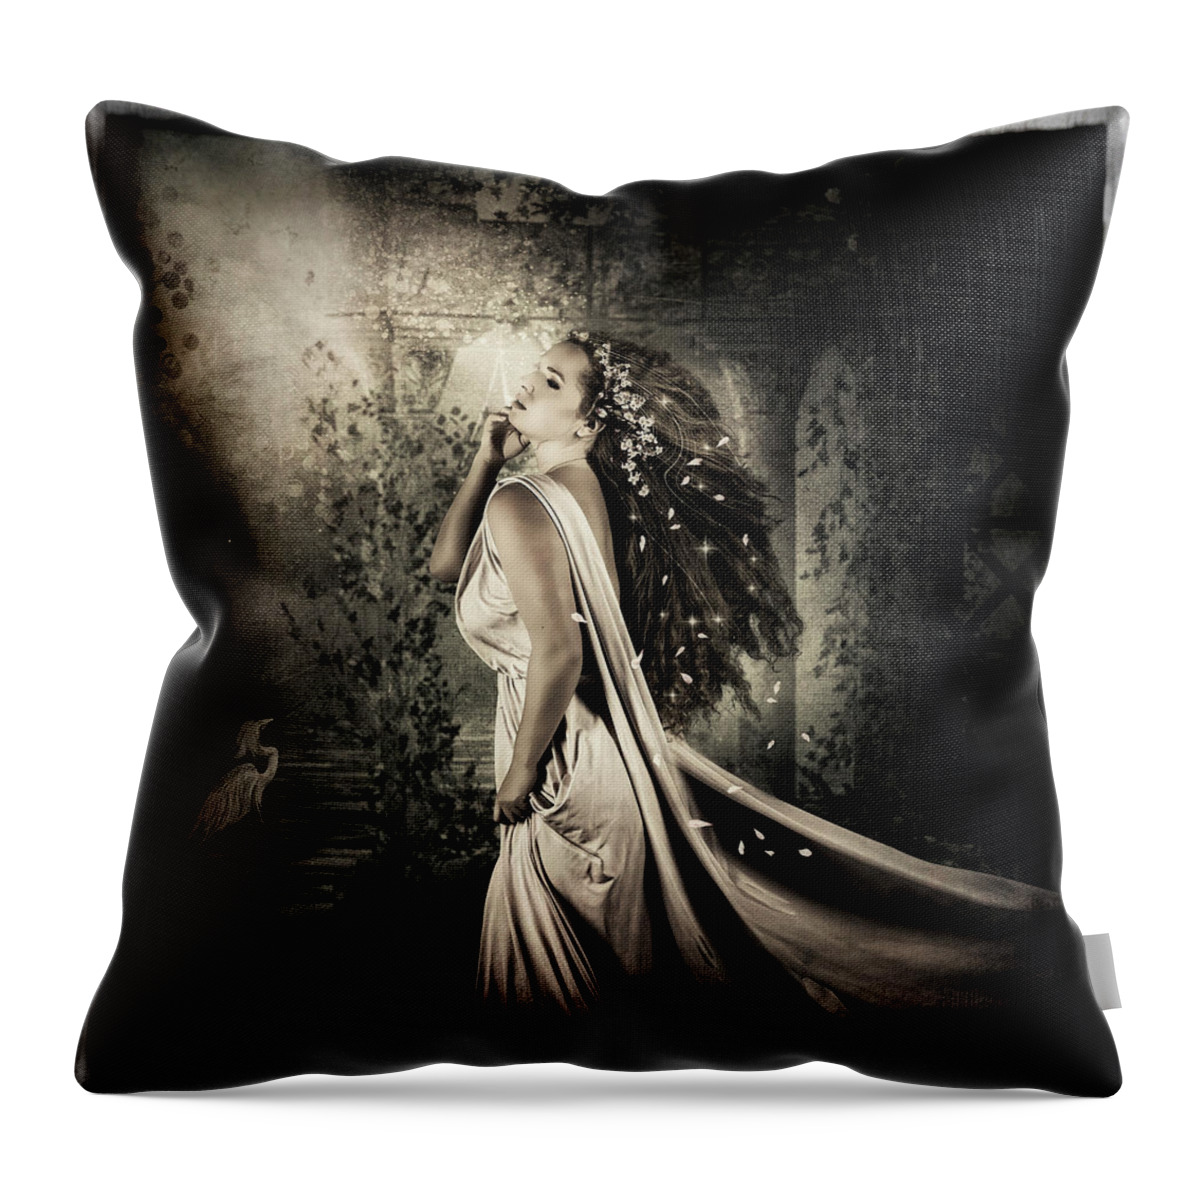 Maiden Throw Pillow featuring the digital art Passion by Maggy Pease